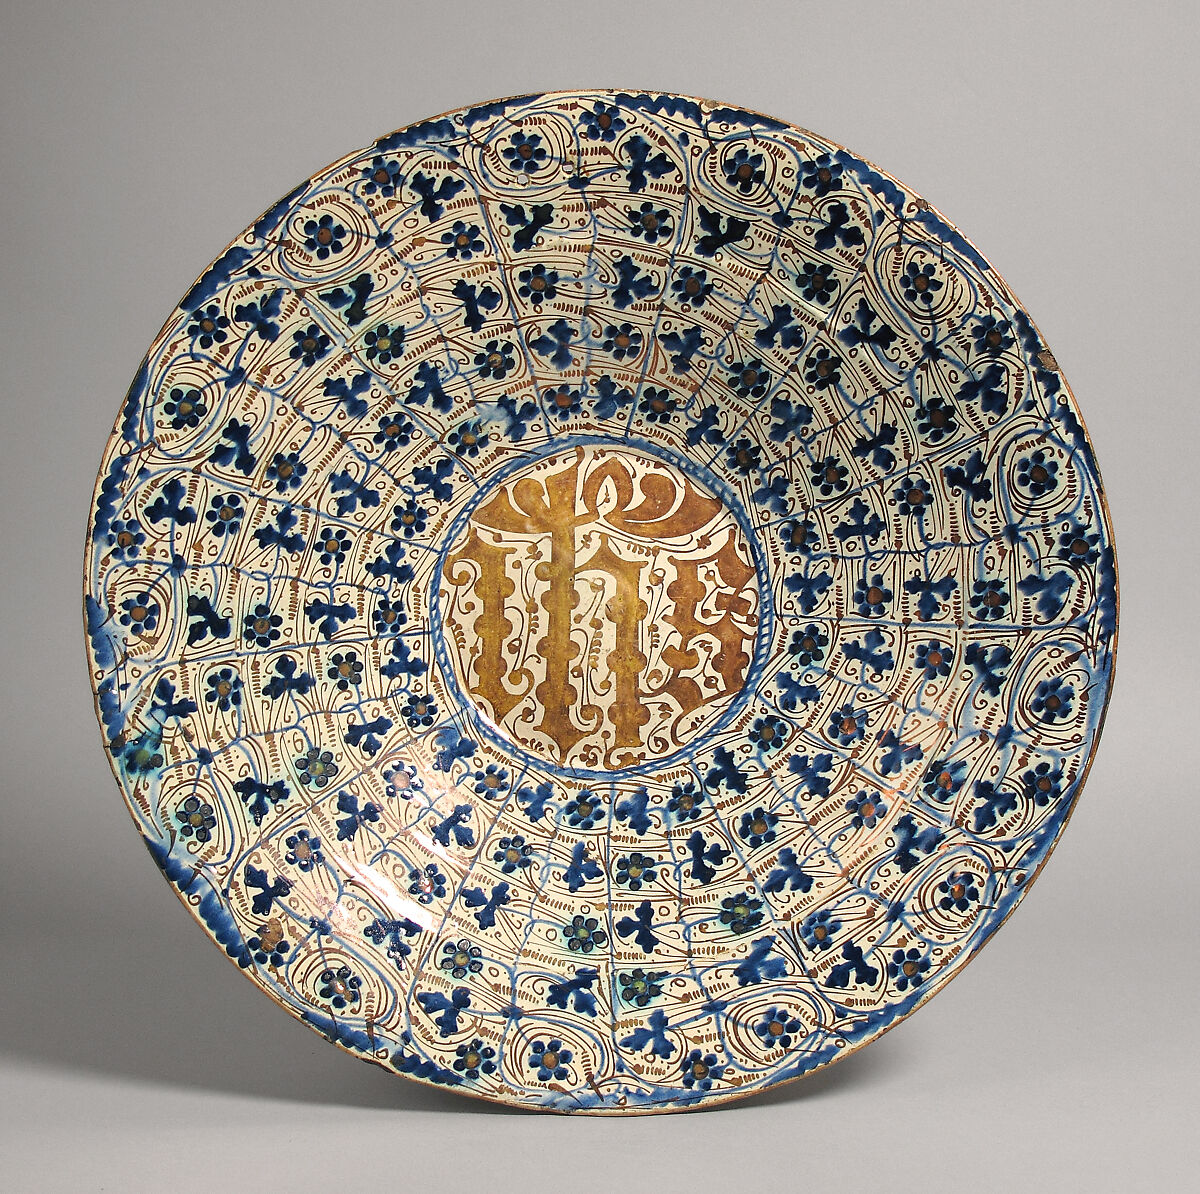 Dish with IHS Monogram and Floral Pattern, Tin-glazed earthenware, Spanish 